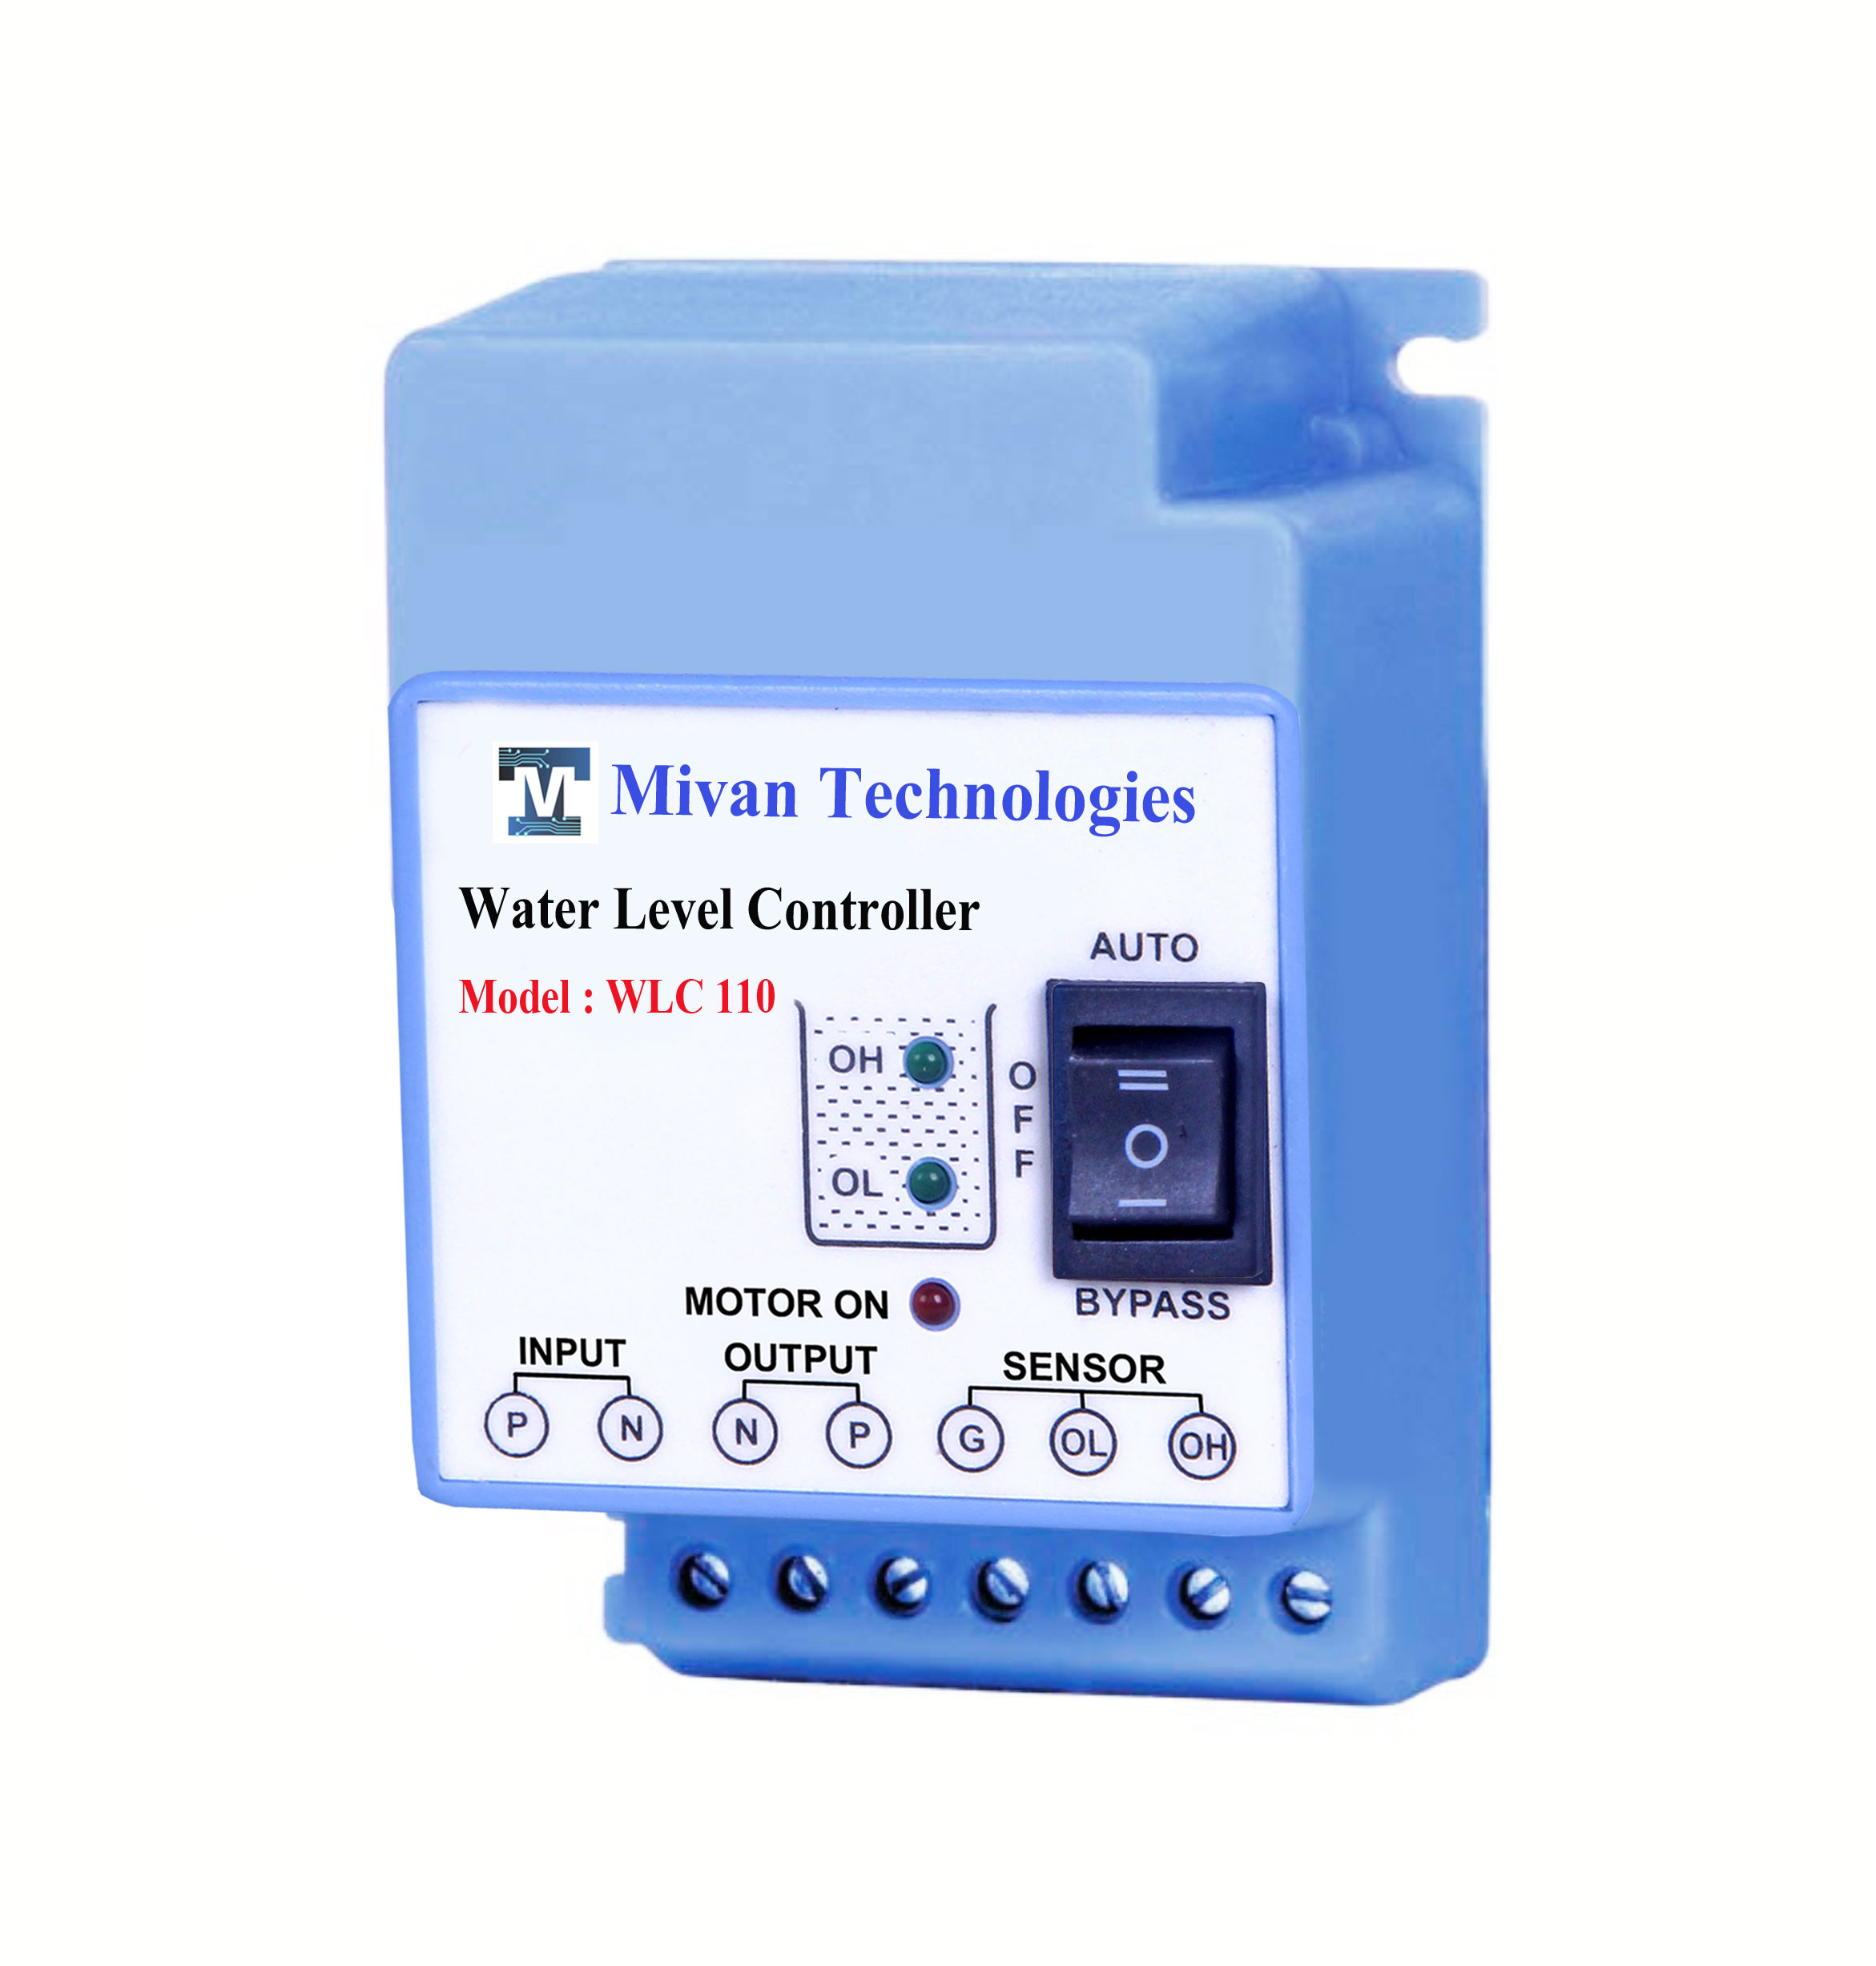 WLC 110 Water Level Controller and 3 sensors with water level indications